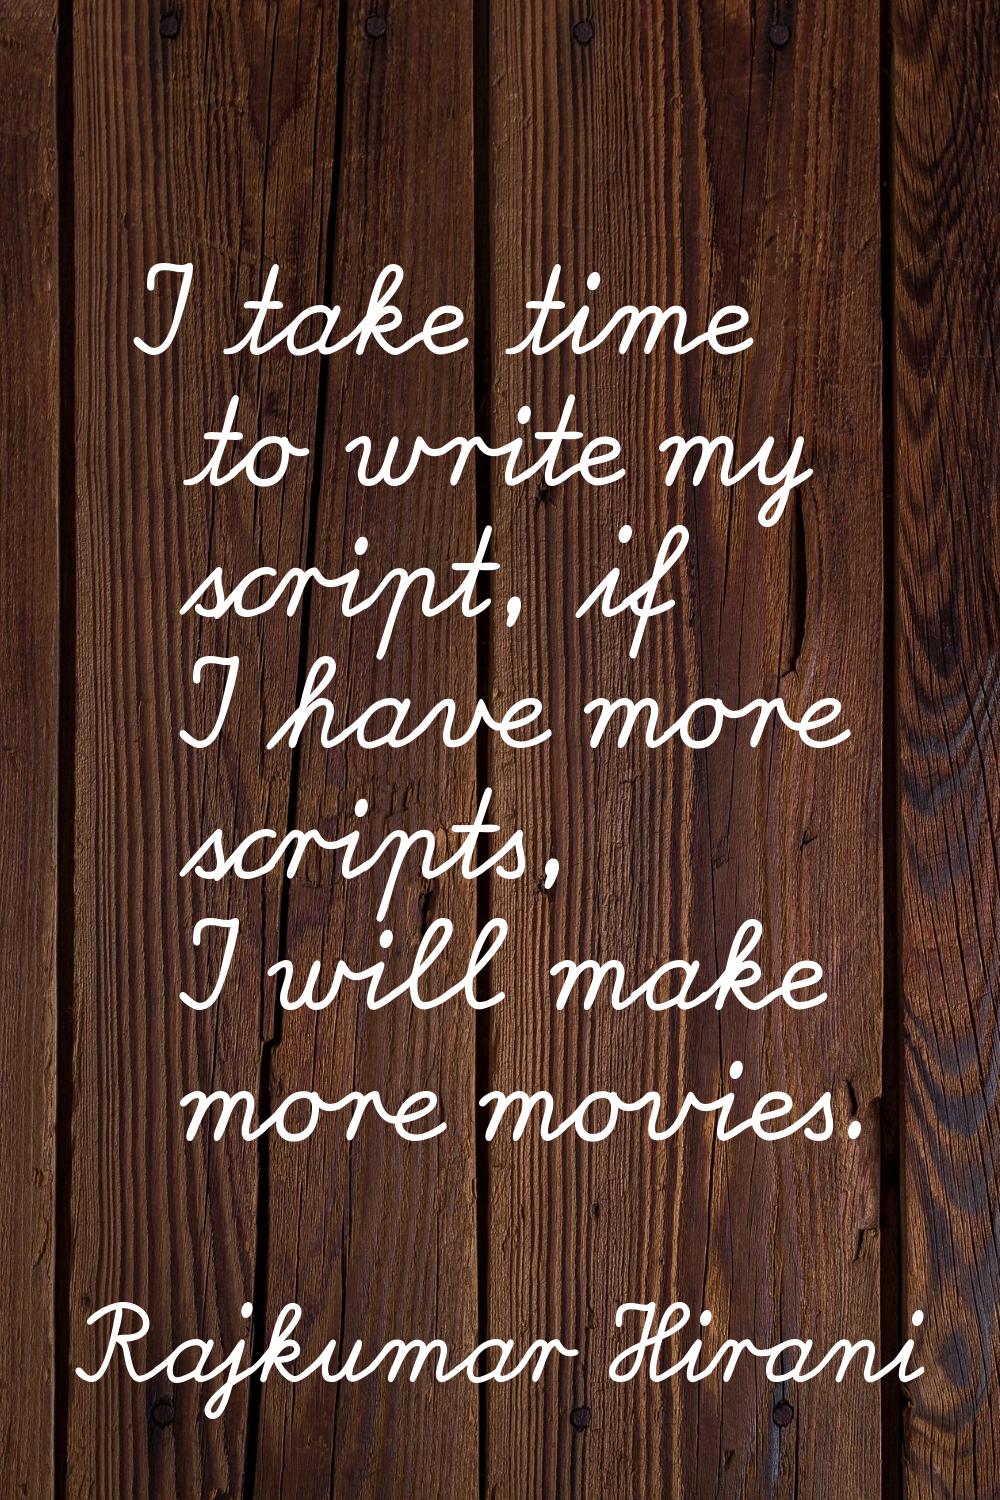 I take time to write my script, if I have more scripts, I will make more movies.